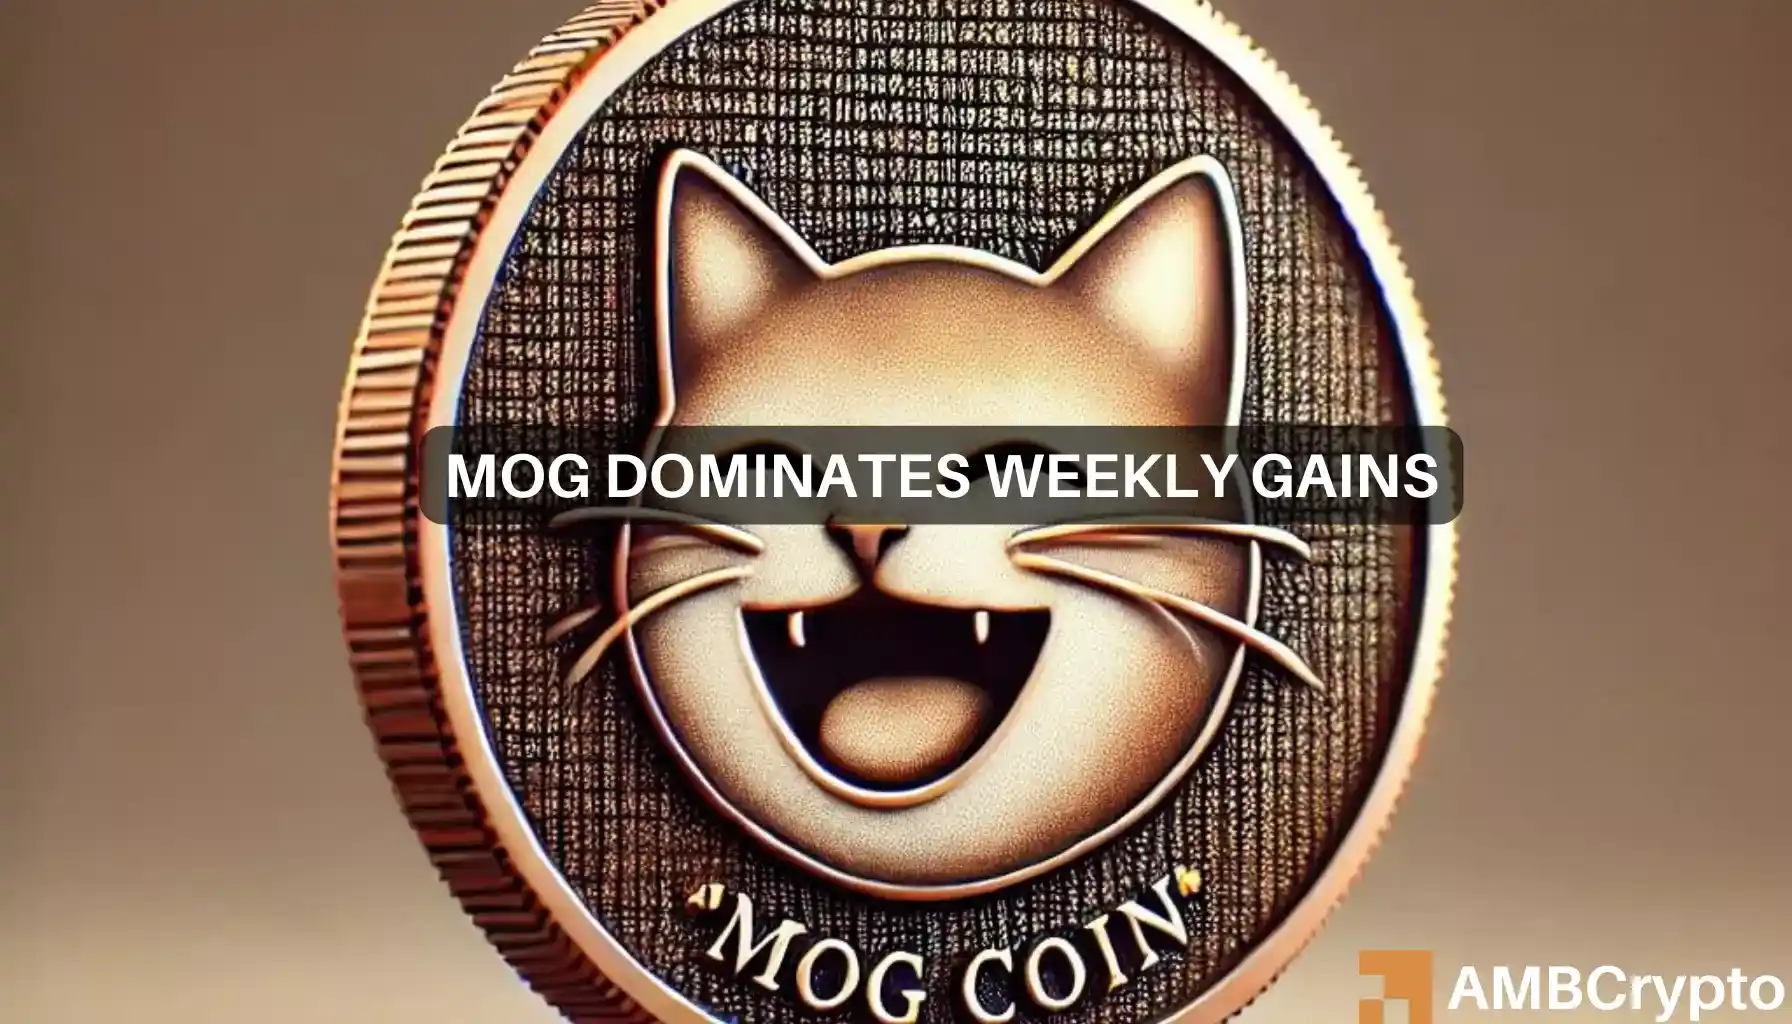 Mog coin smashes 100% gains in 7 days: Will MOG’s bull run continue?